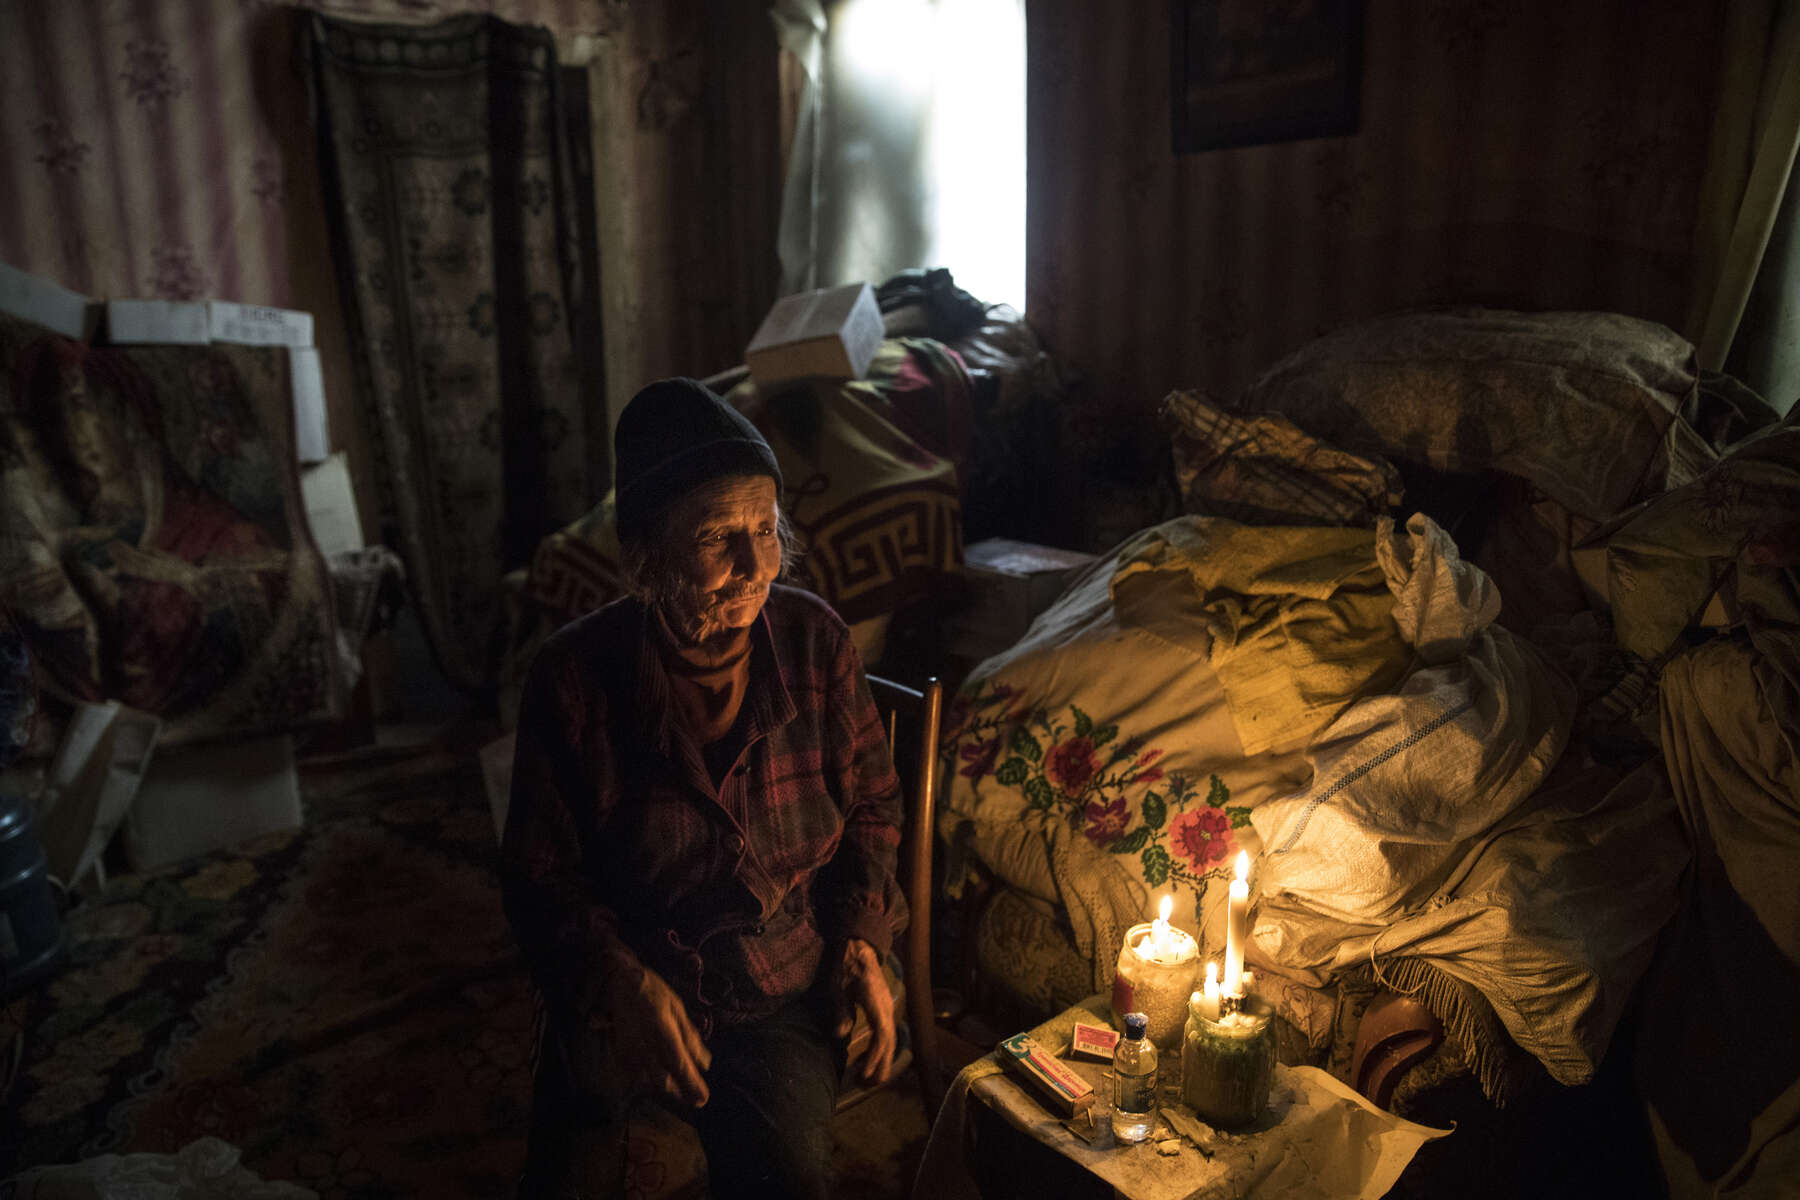 Opytne, Eastern Ukraine:  Mariya Gorpynych, age 76, lives alone. She speaks with tears in her eyes while talking about the death of her son. Victor,48 was killed due to the war in 2016, he was fatally injured by shelling that hit the home. He died in her hands. Her husband, died in the same year from a heart attack  from extreme stress of living too close to the front line. Mariya refuses to leave her village because her family are buried there.{quote}I have nowhere to flee, my whole family is buried here.{quote}  {quote}I got used to the continued shelling.{quote} Opytne is a war torn village on the contact line where only 43 people are left due to the dangers. 